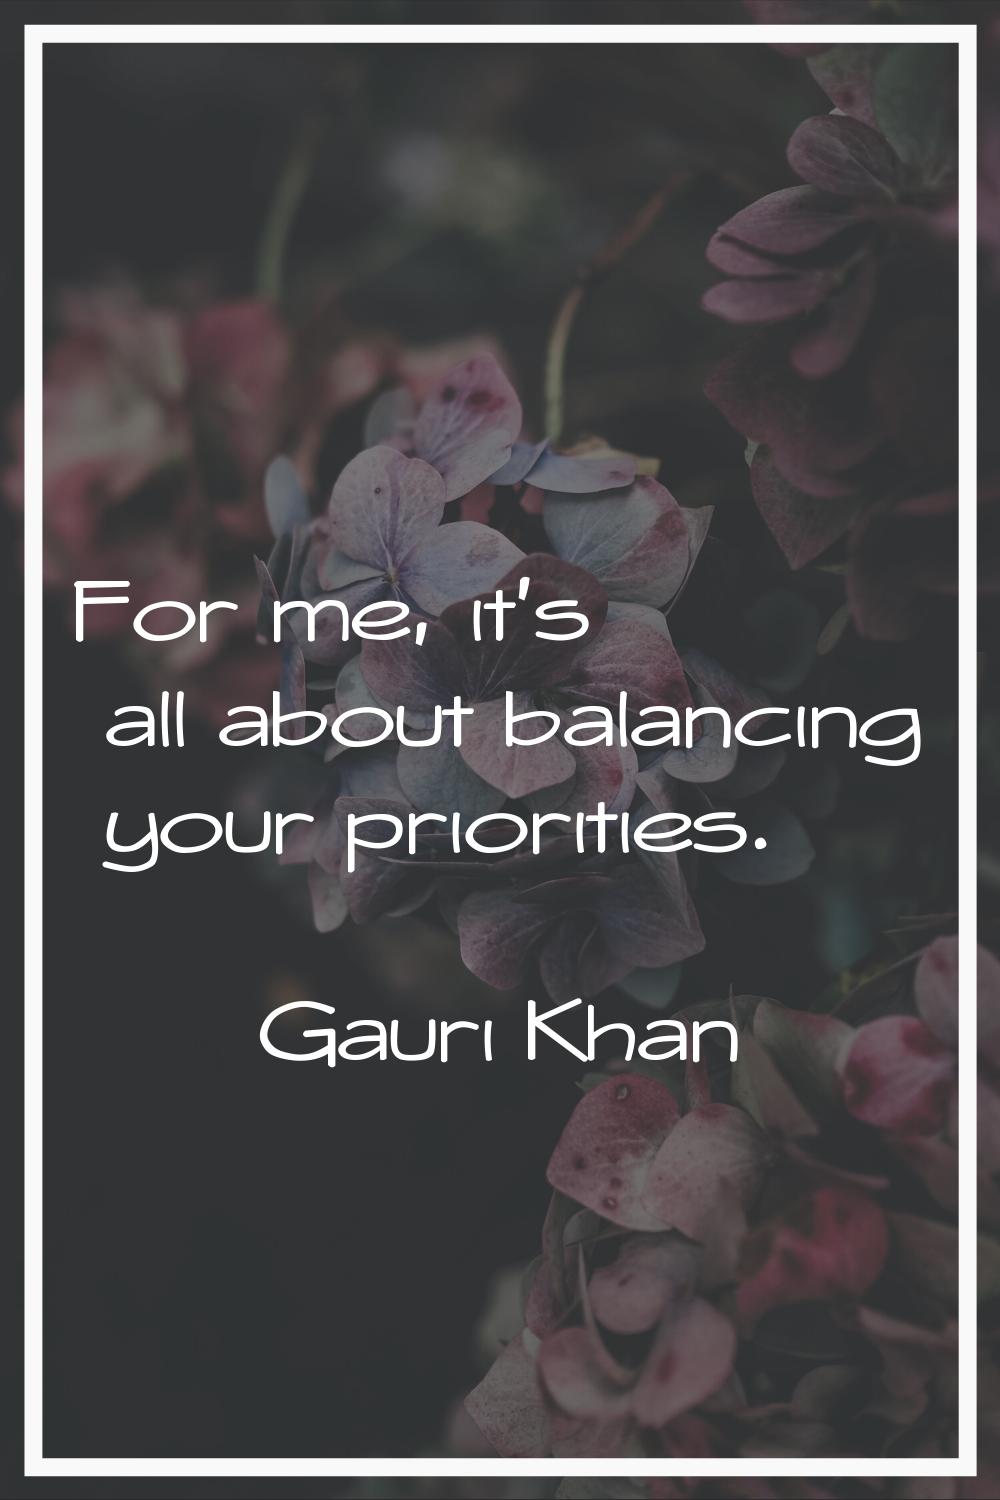 For me, it's all about balancing your priorities.